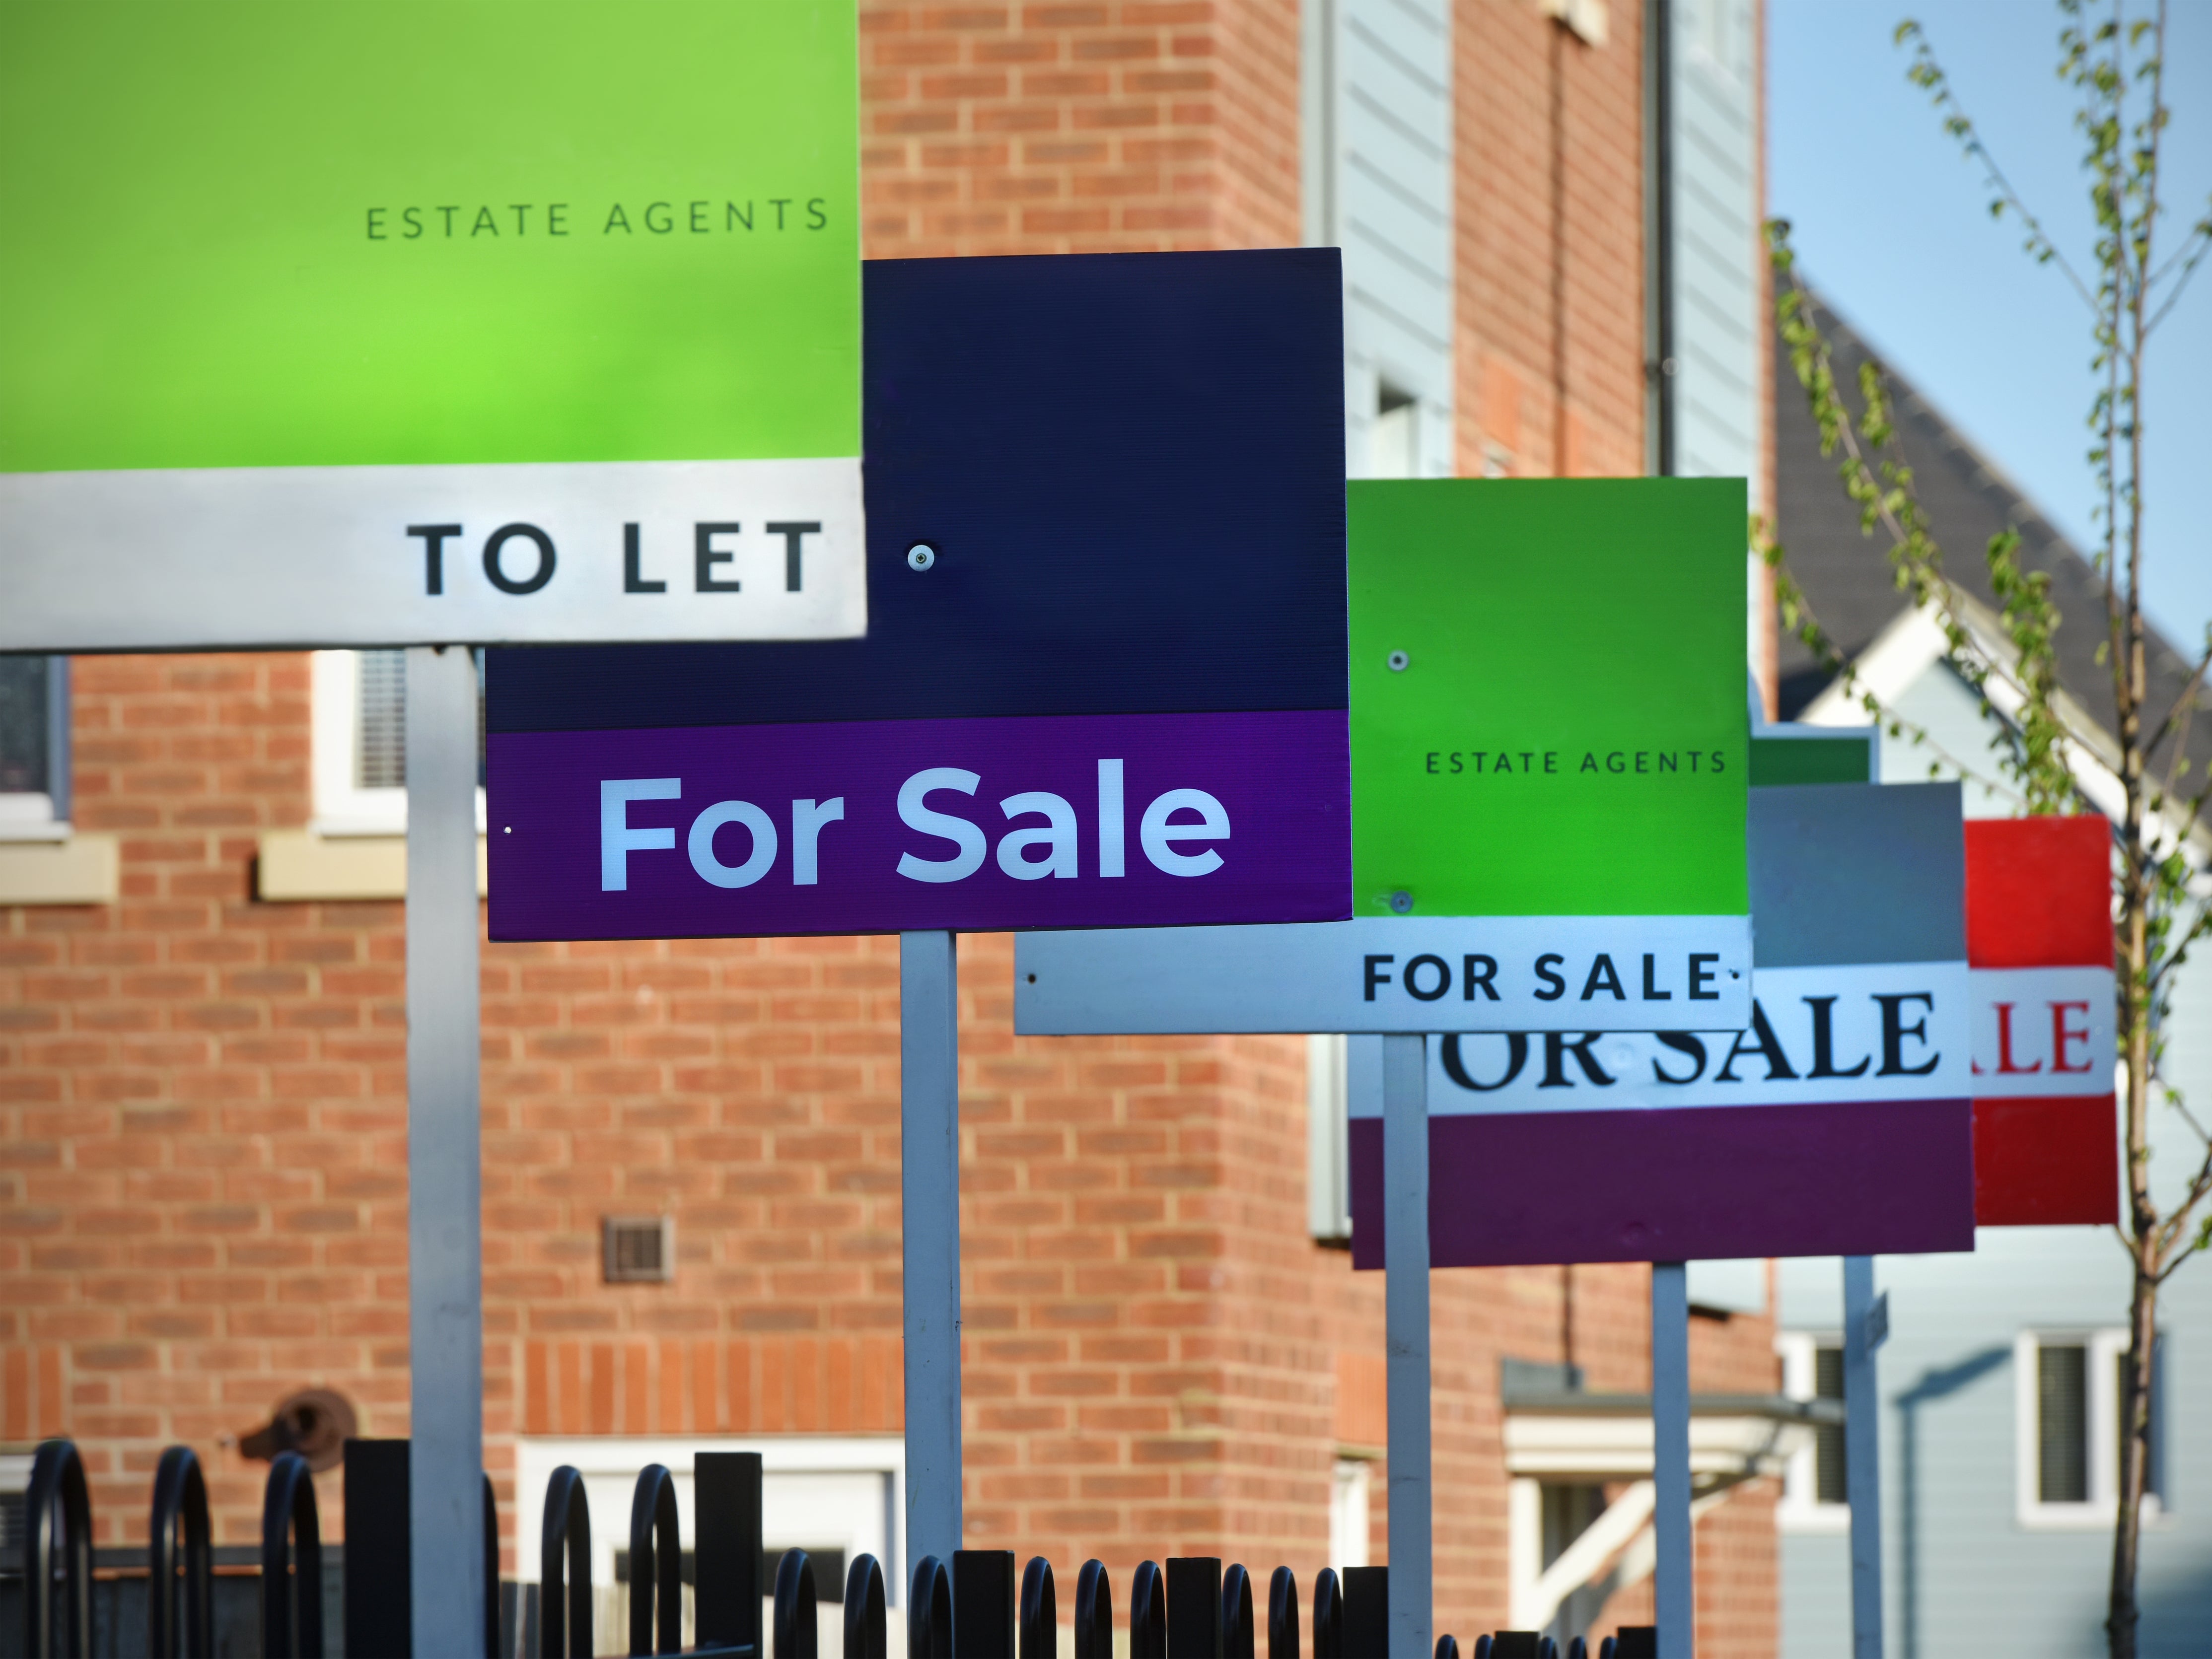 Homeowners could end up £326,000 wealthier over a 30-year period than people who rent, according to a new report.